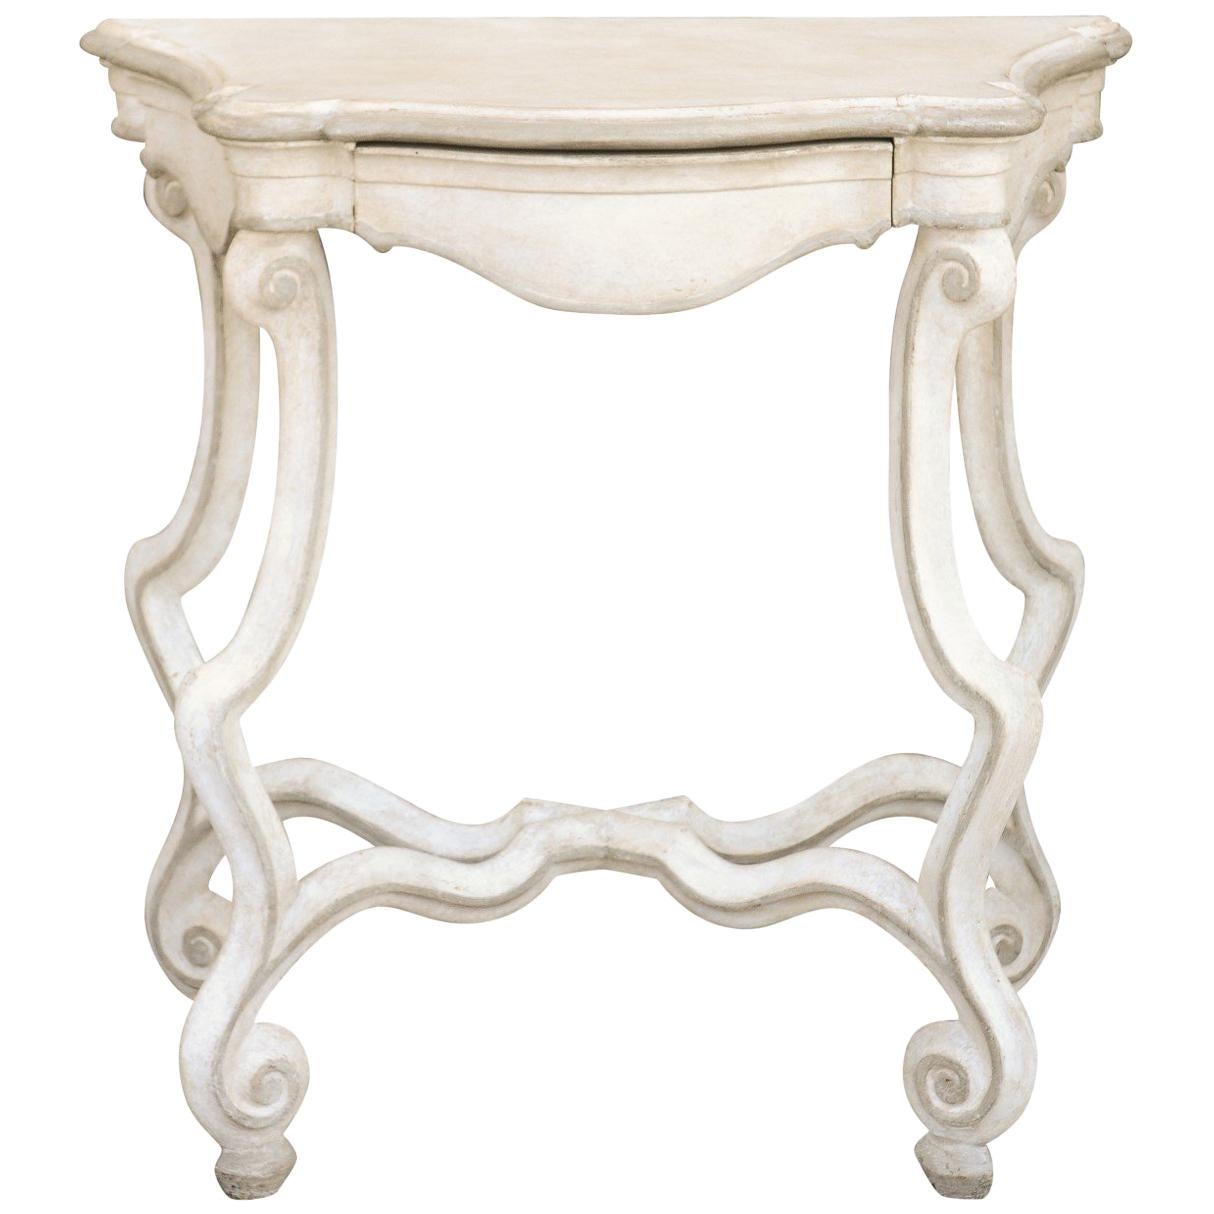 French 1900 Rococo Style Painted Console Table with Scrolling Legs and Stretcher